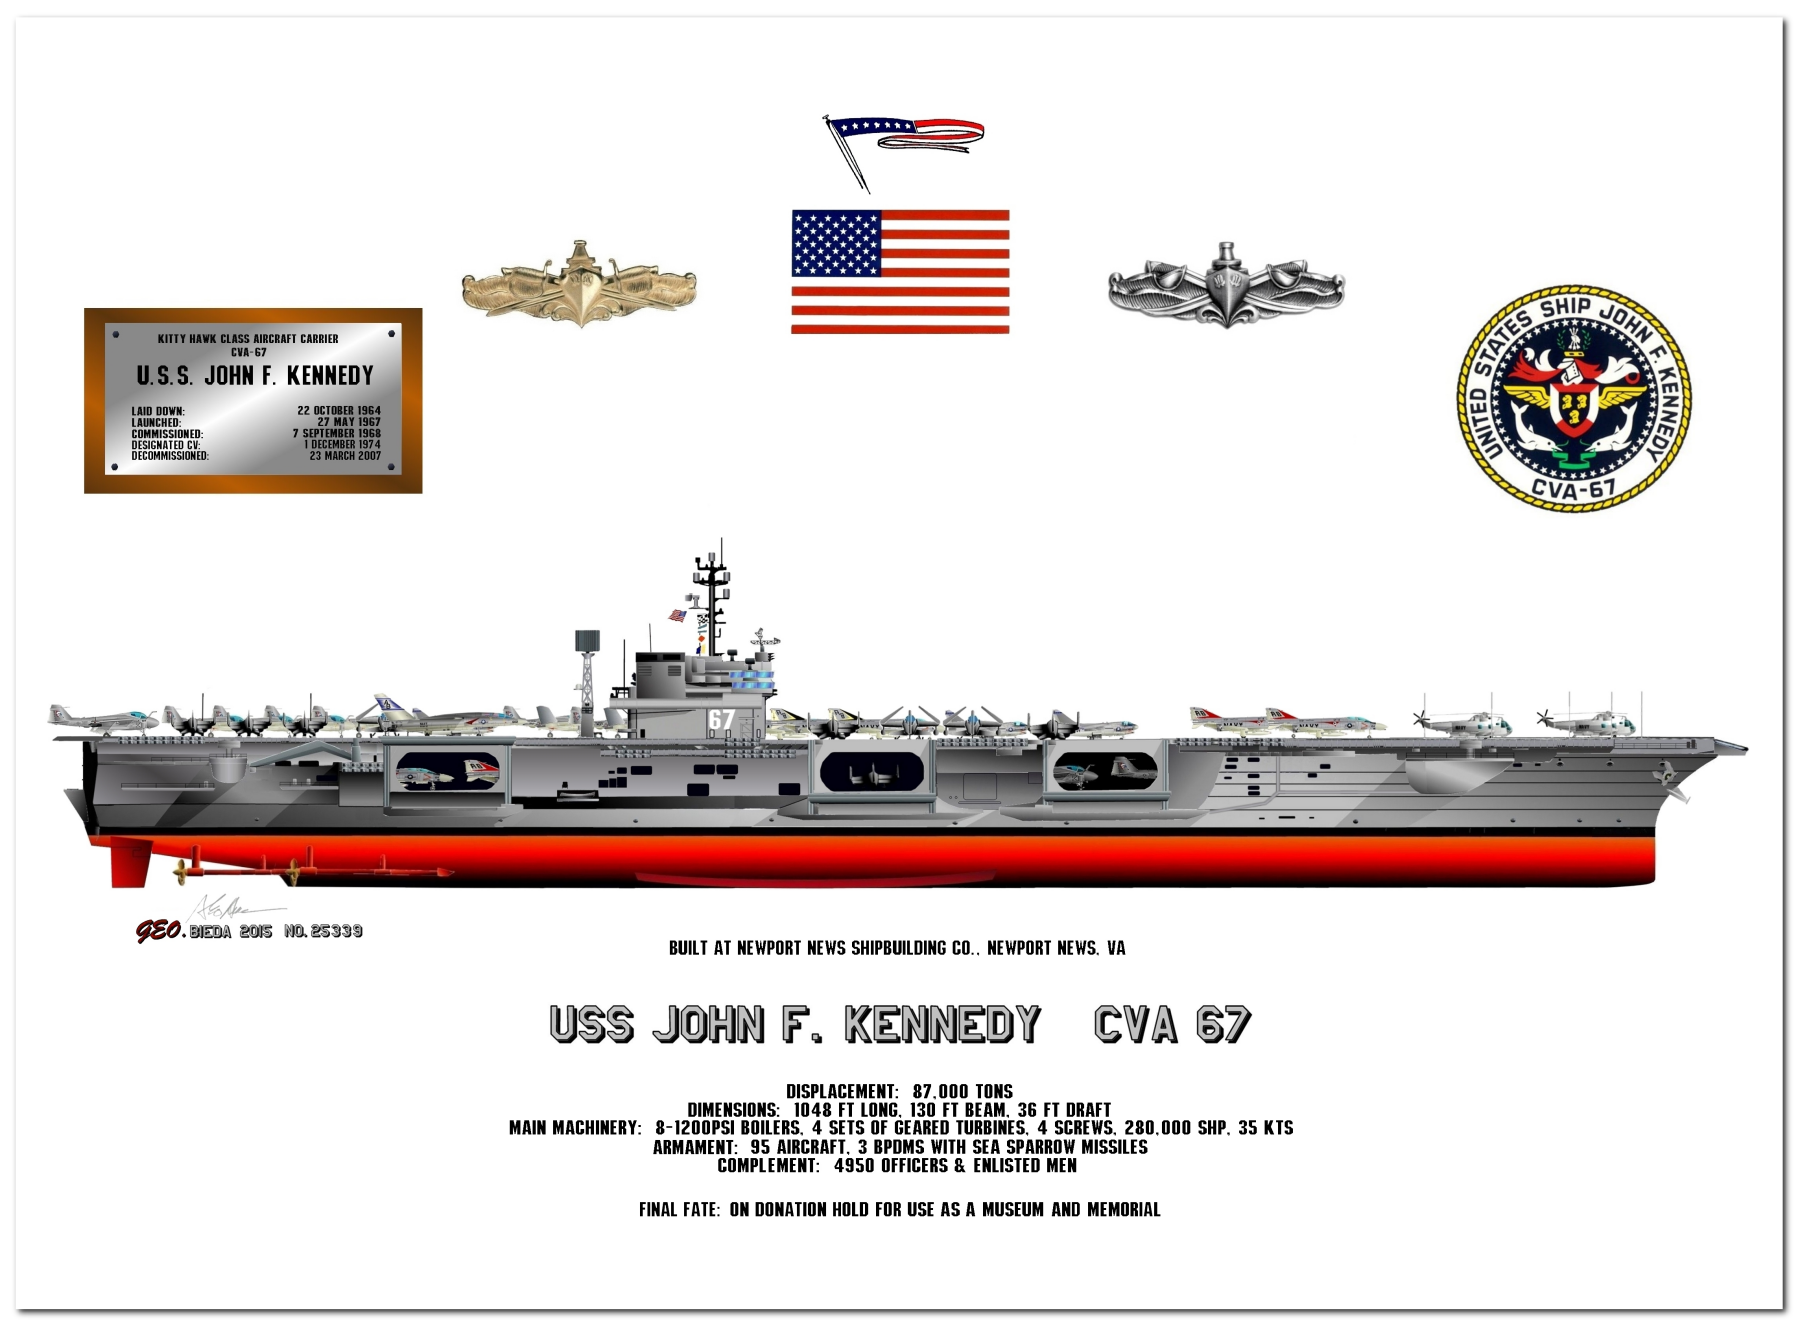 John F Kennedy Class Aircraft Carrier Profile Drawings by George Bieda